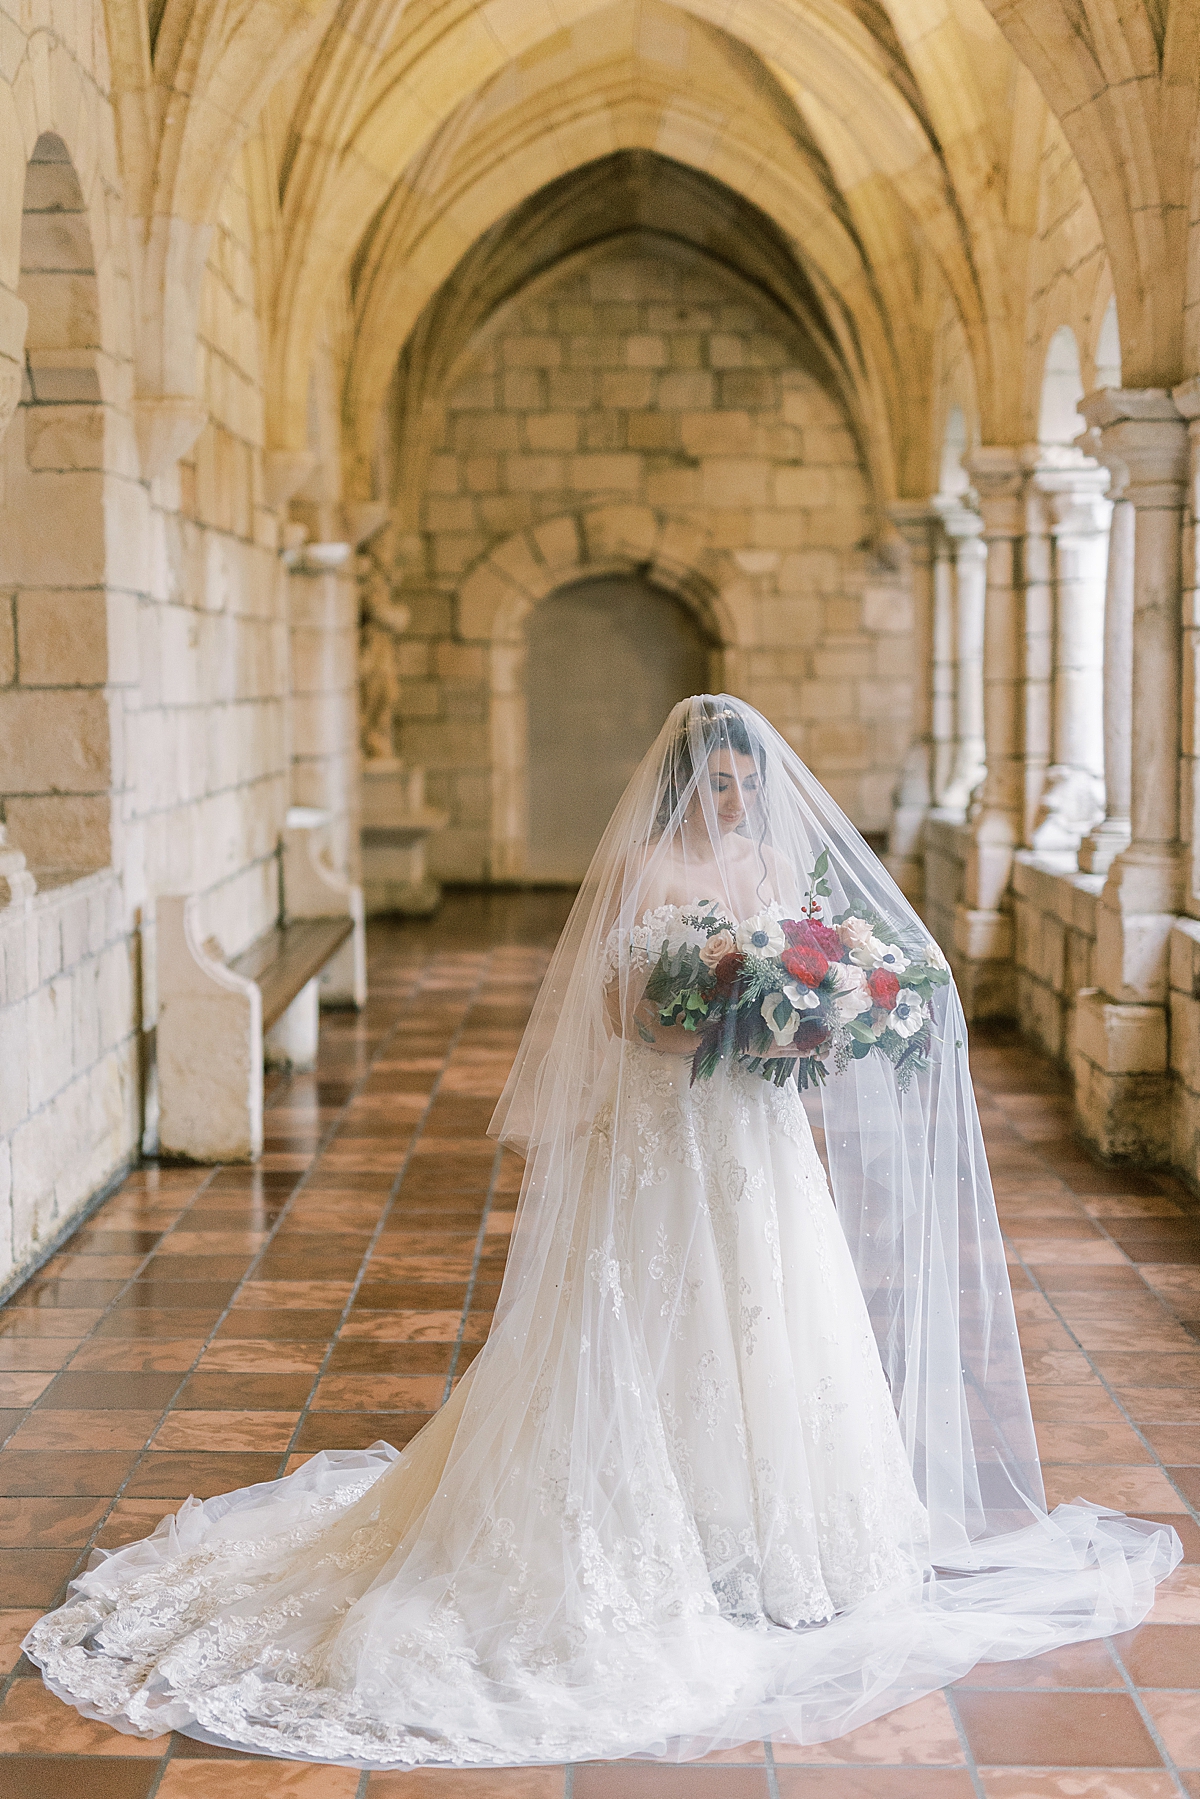 The bride standing in the halls at her Ancient Spanish Monastery Wedding venue holding her large bouquet of white and red flowers.